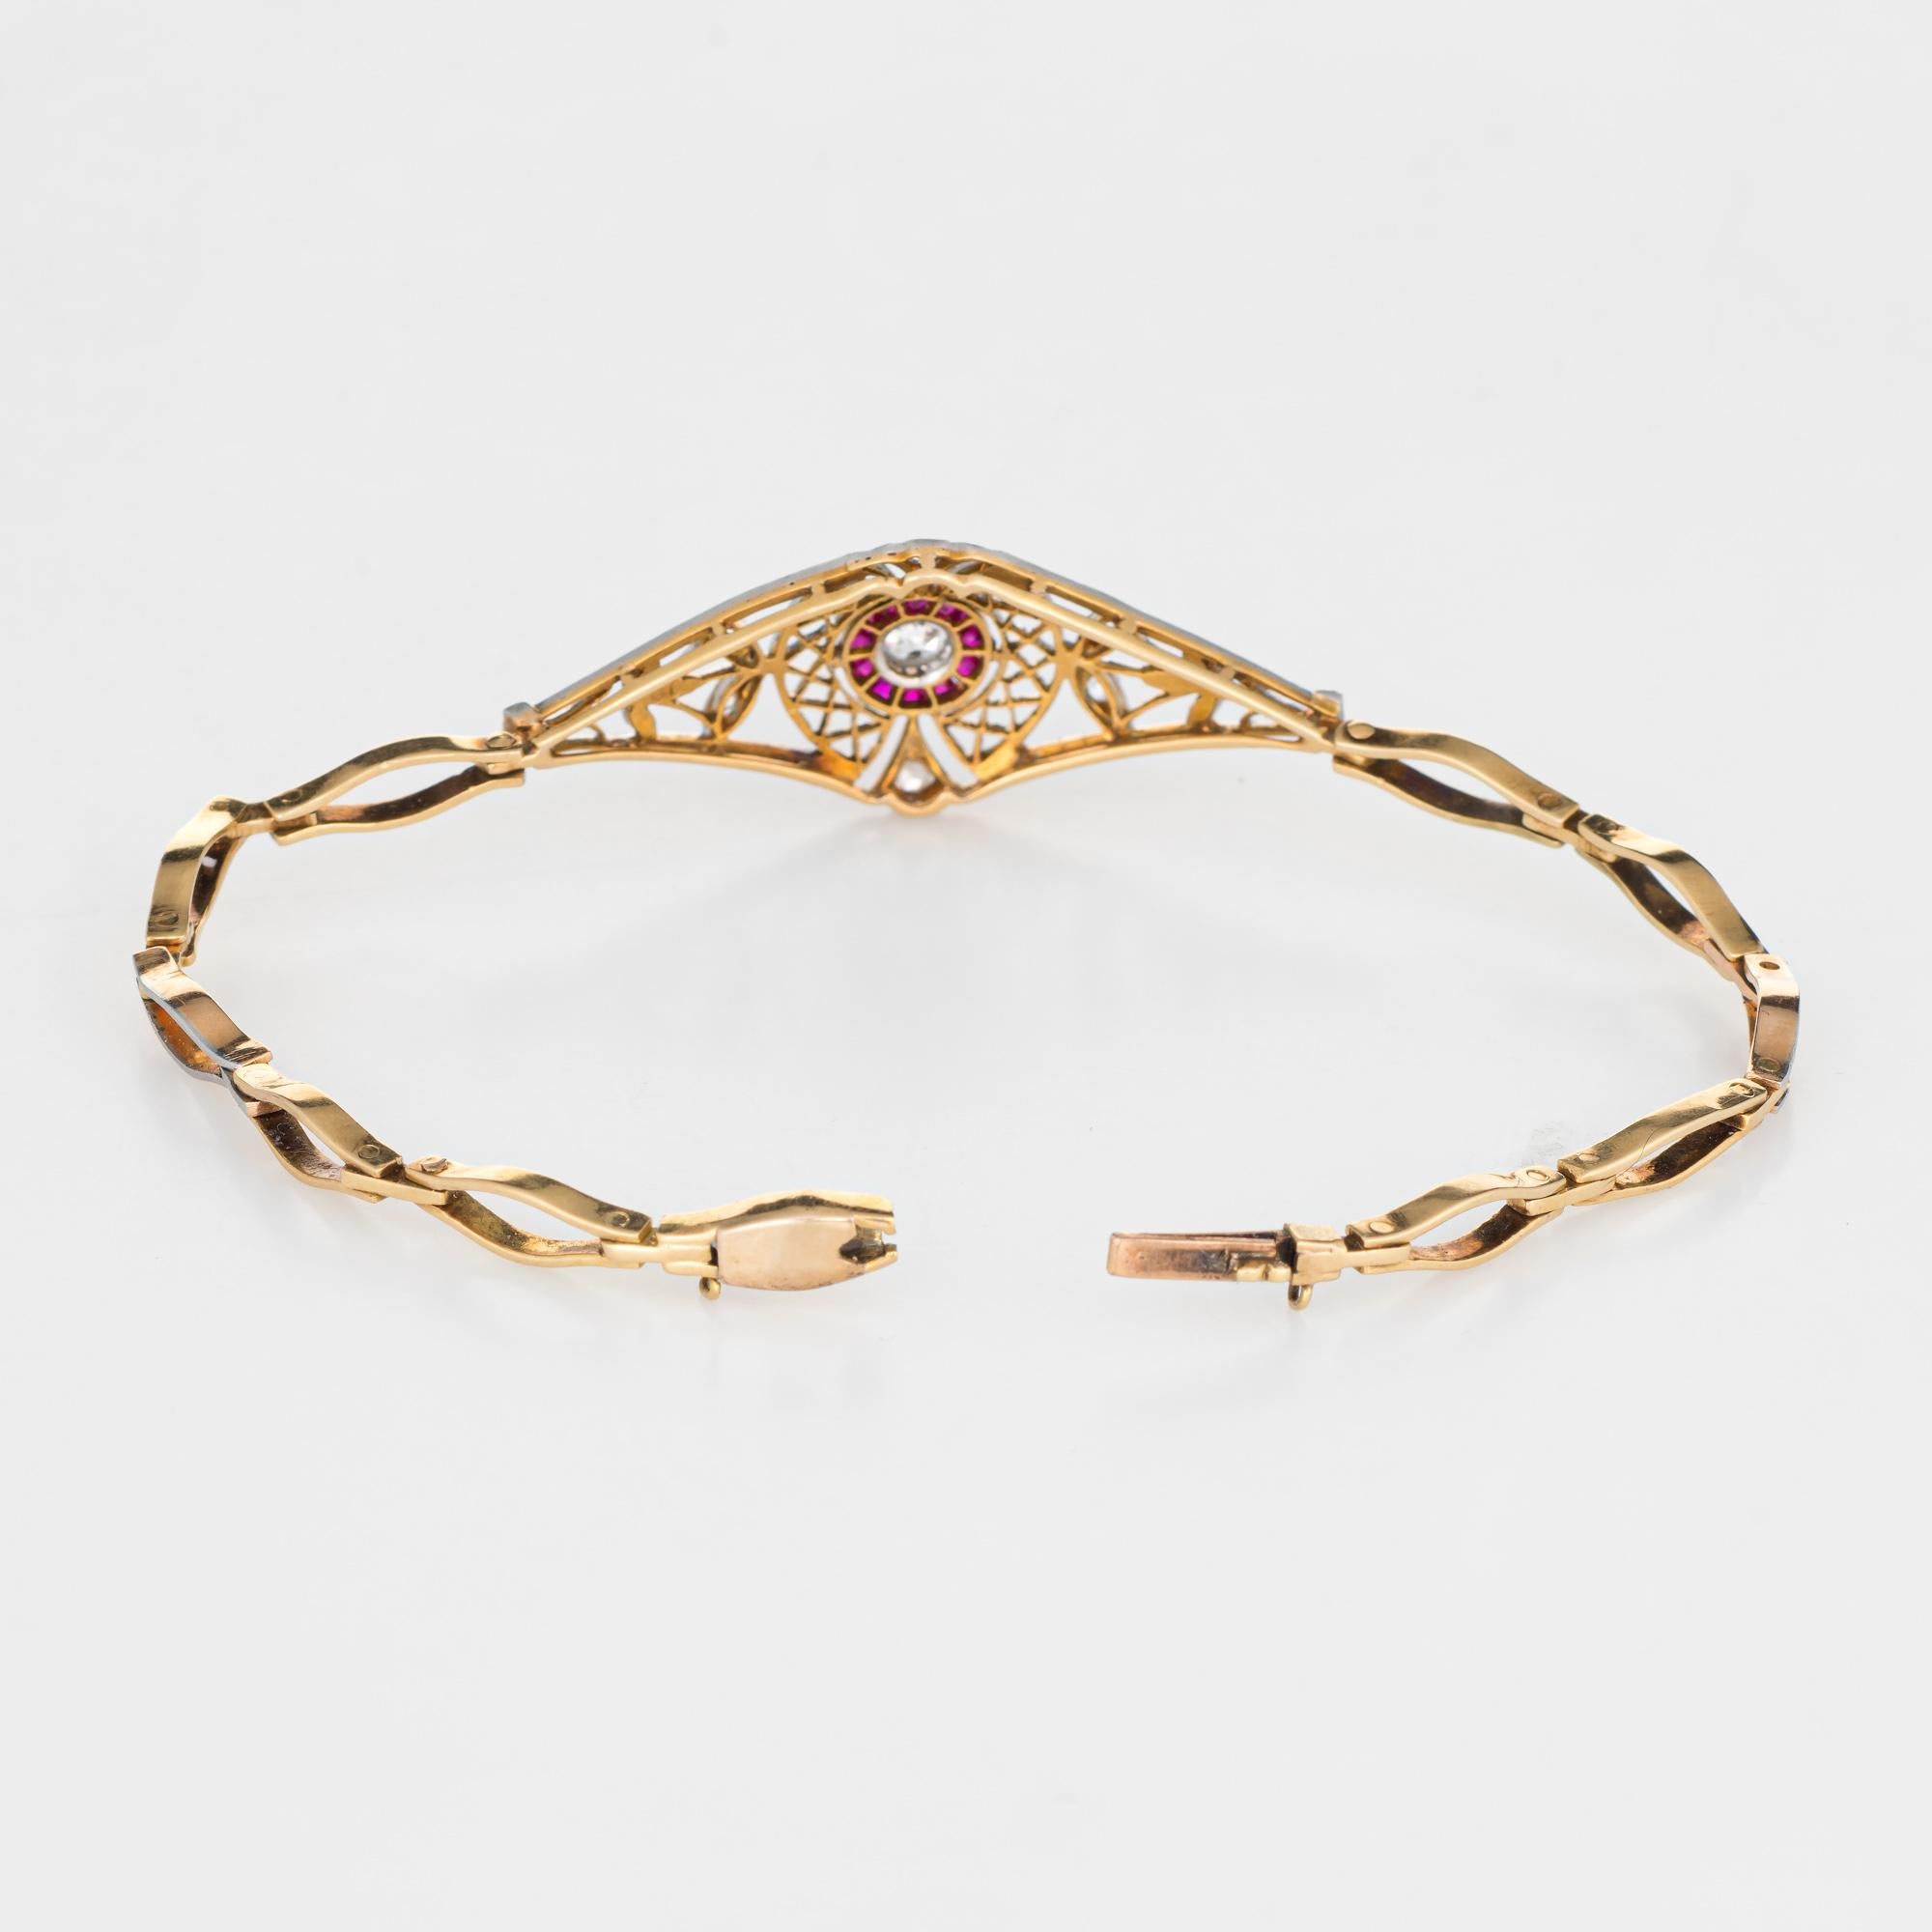 Stylish and elegant antique Edwardian era bracelet (circa 1900s to 1910s) crafted in 14k yellow gold & 900 platinum. 

Centrally mounted Old mine cut diamond is estimated at 0.15 carats, accented with two estimated 0.01 carat rose cut diamonds. The